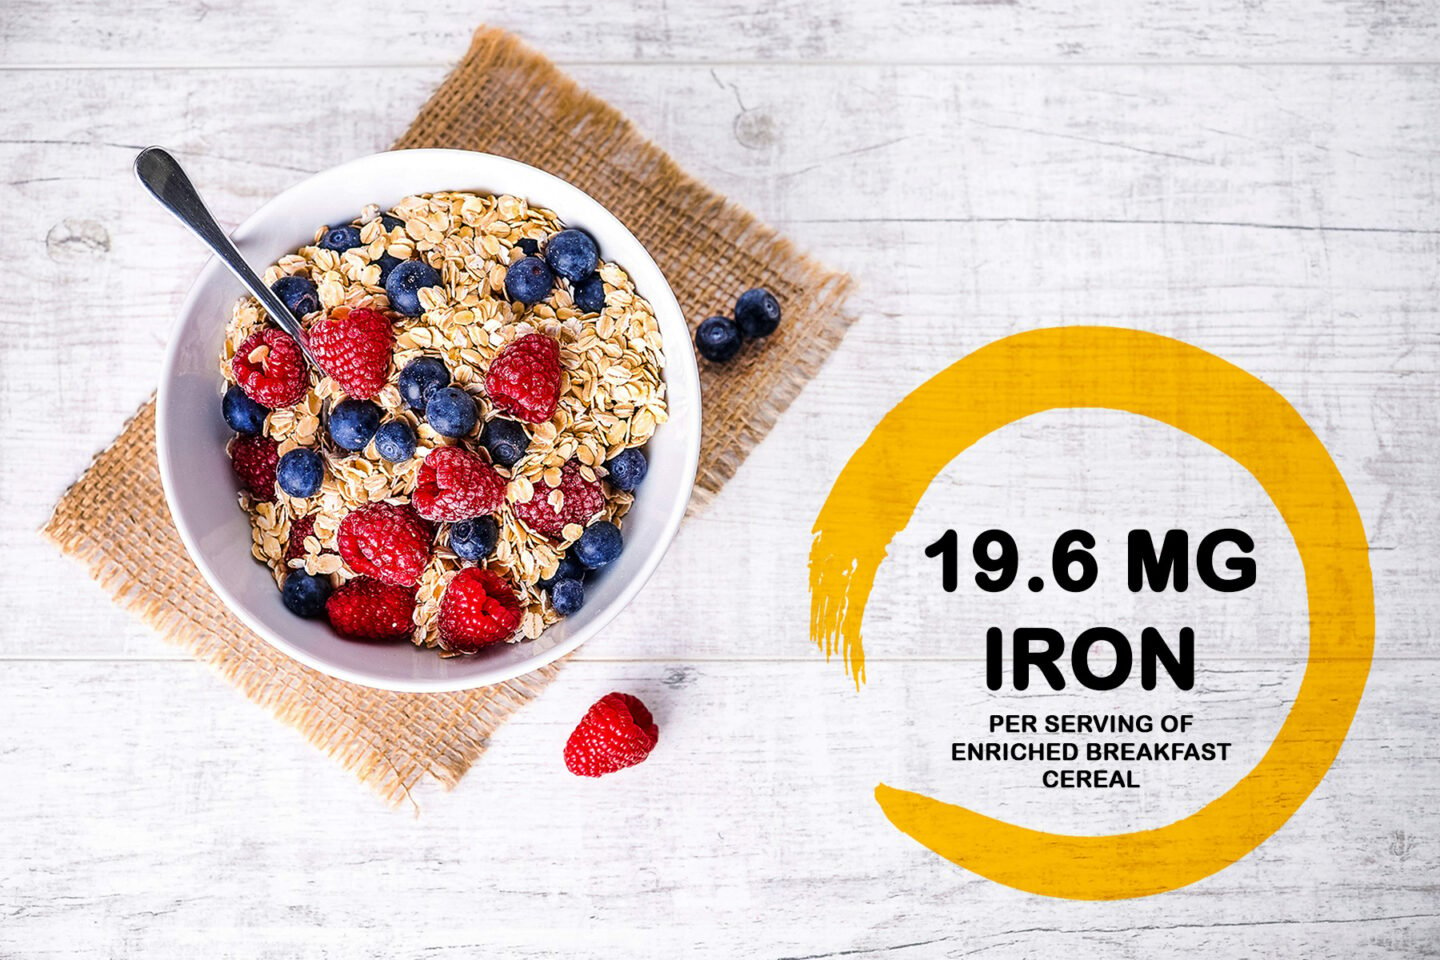 iron per serving of fortified cereal